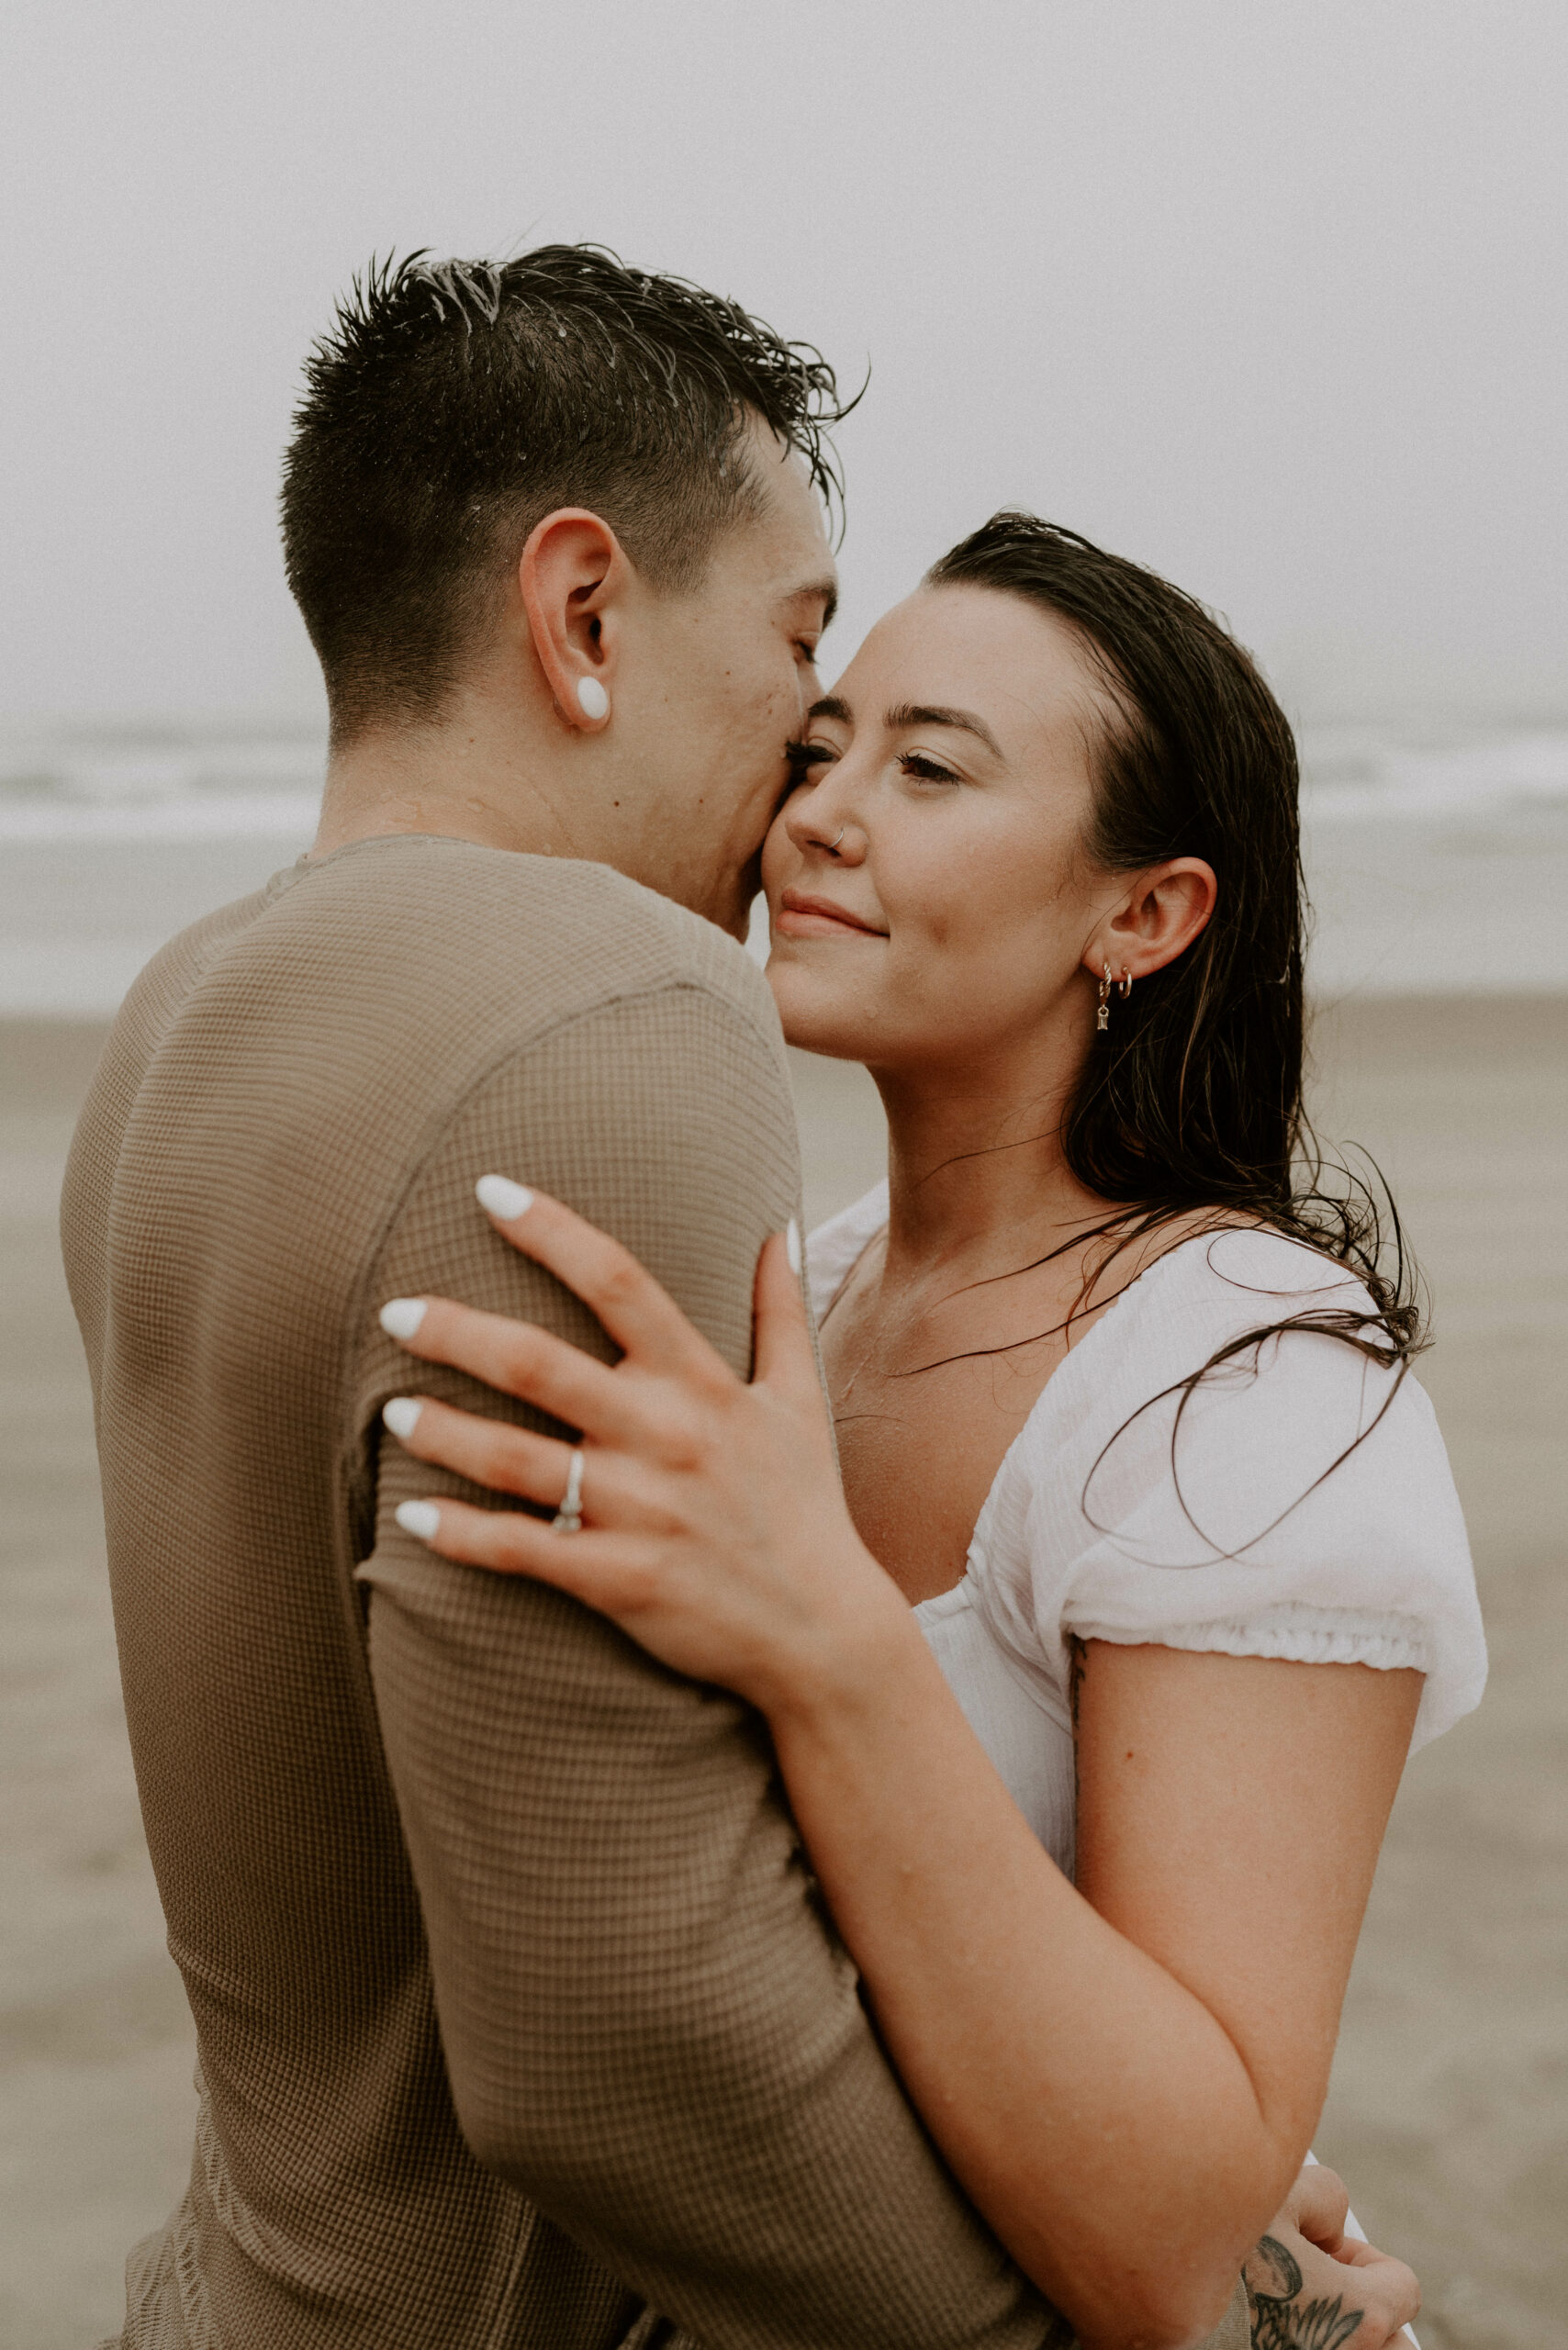 Couple Taking Engagement Photos On Beach During Wind Storm